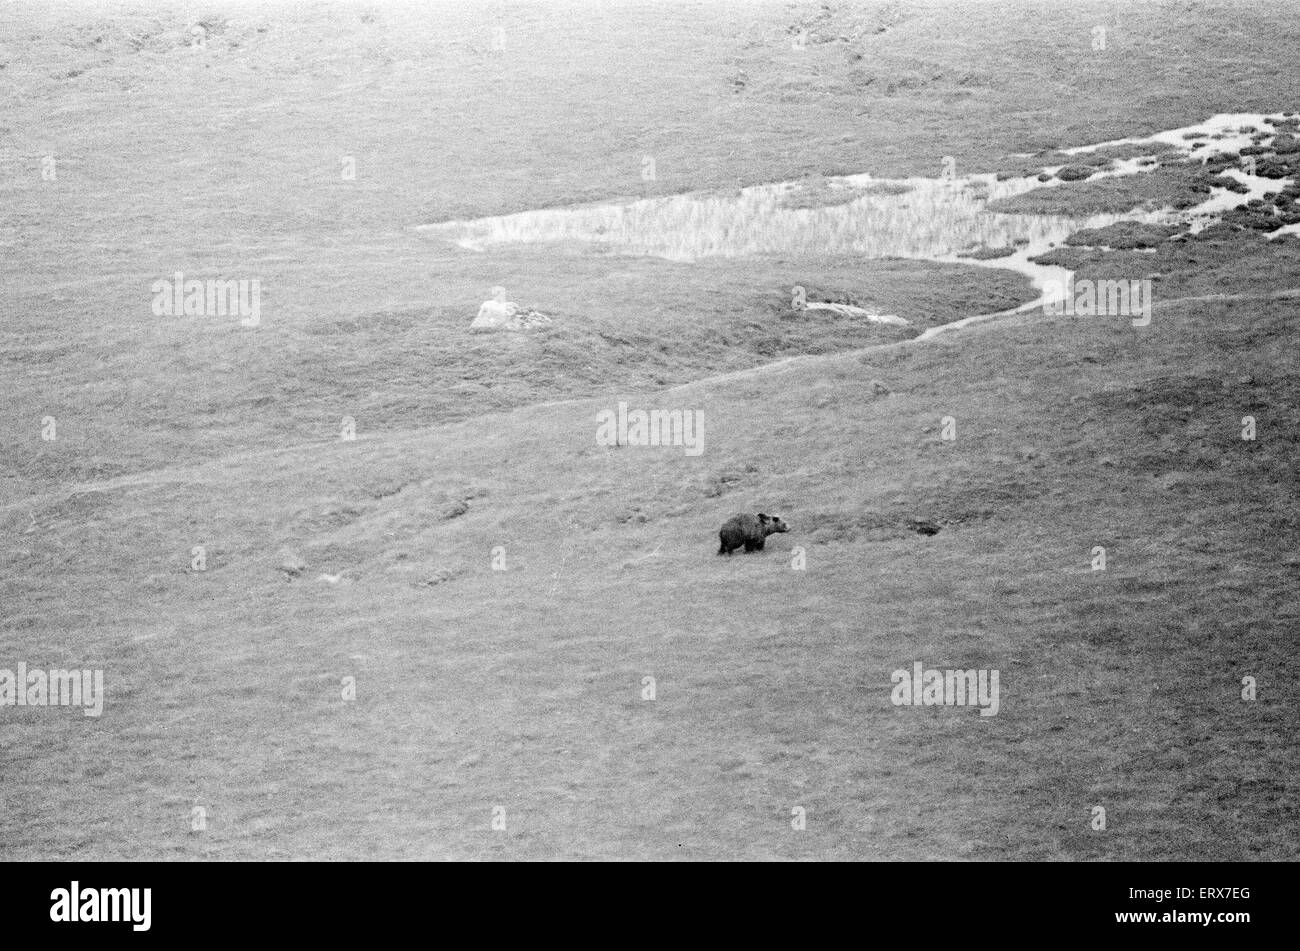 Hercules The Bear, tracked down and captured on the waste moorlands of North Uist, in the Outer Hebrides of Scotland. 14th September 1980. The Bear was chased down by helicopter. Hercules has been in the wild for 3 weeks. Stock Photo